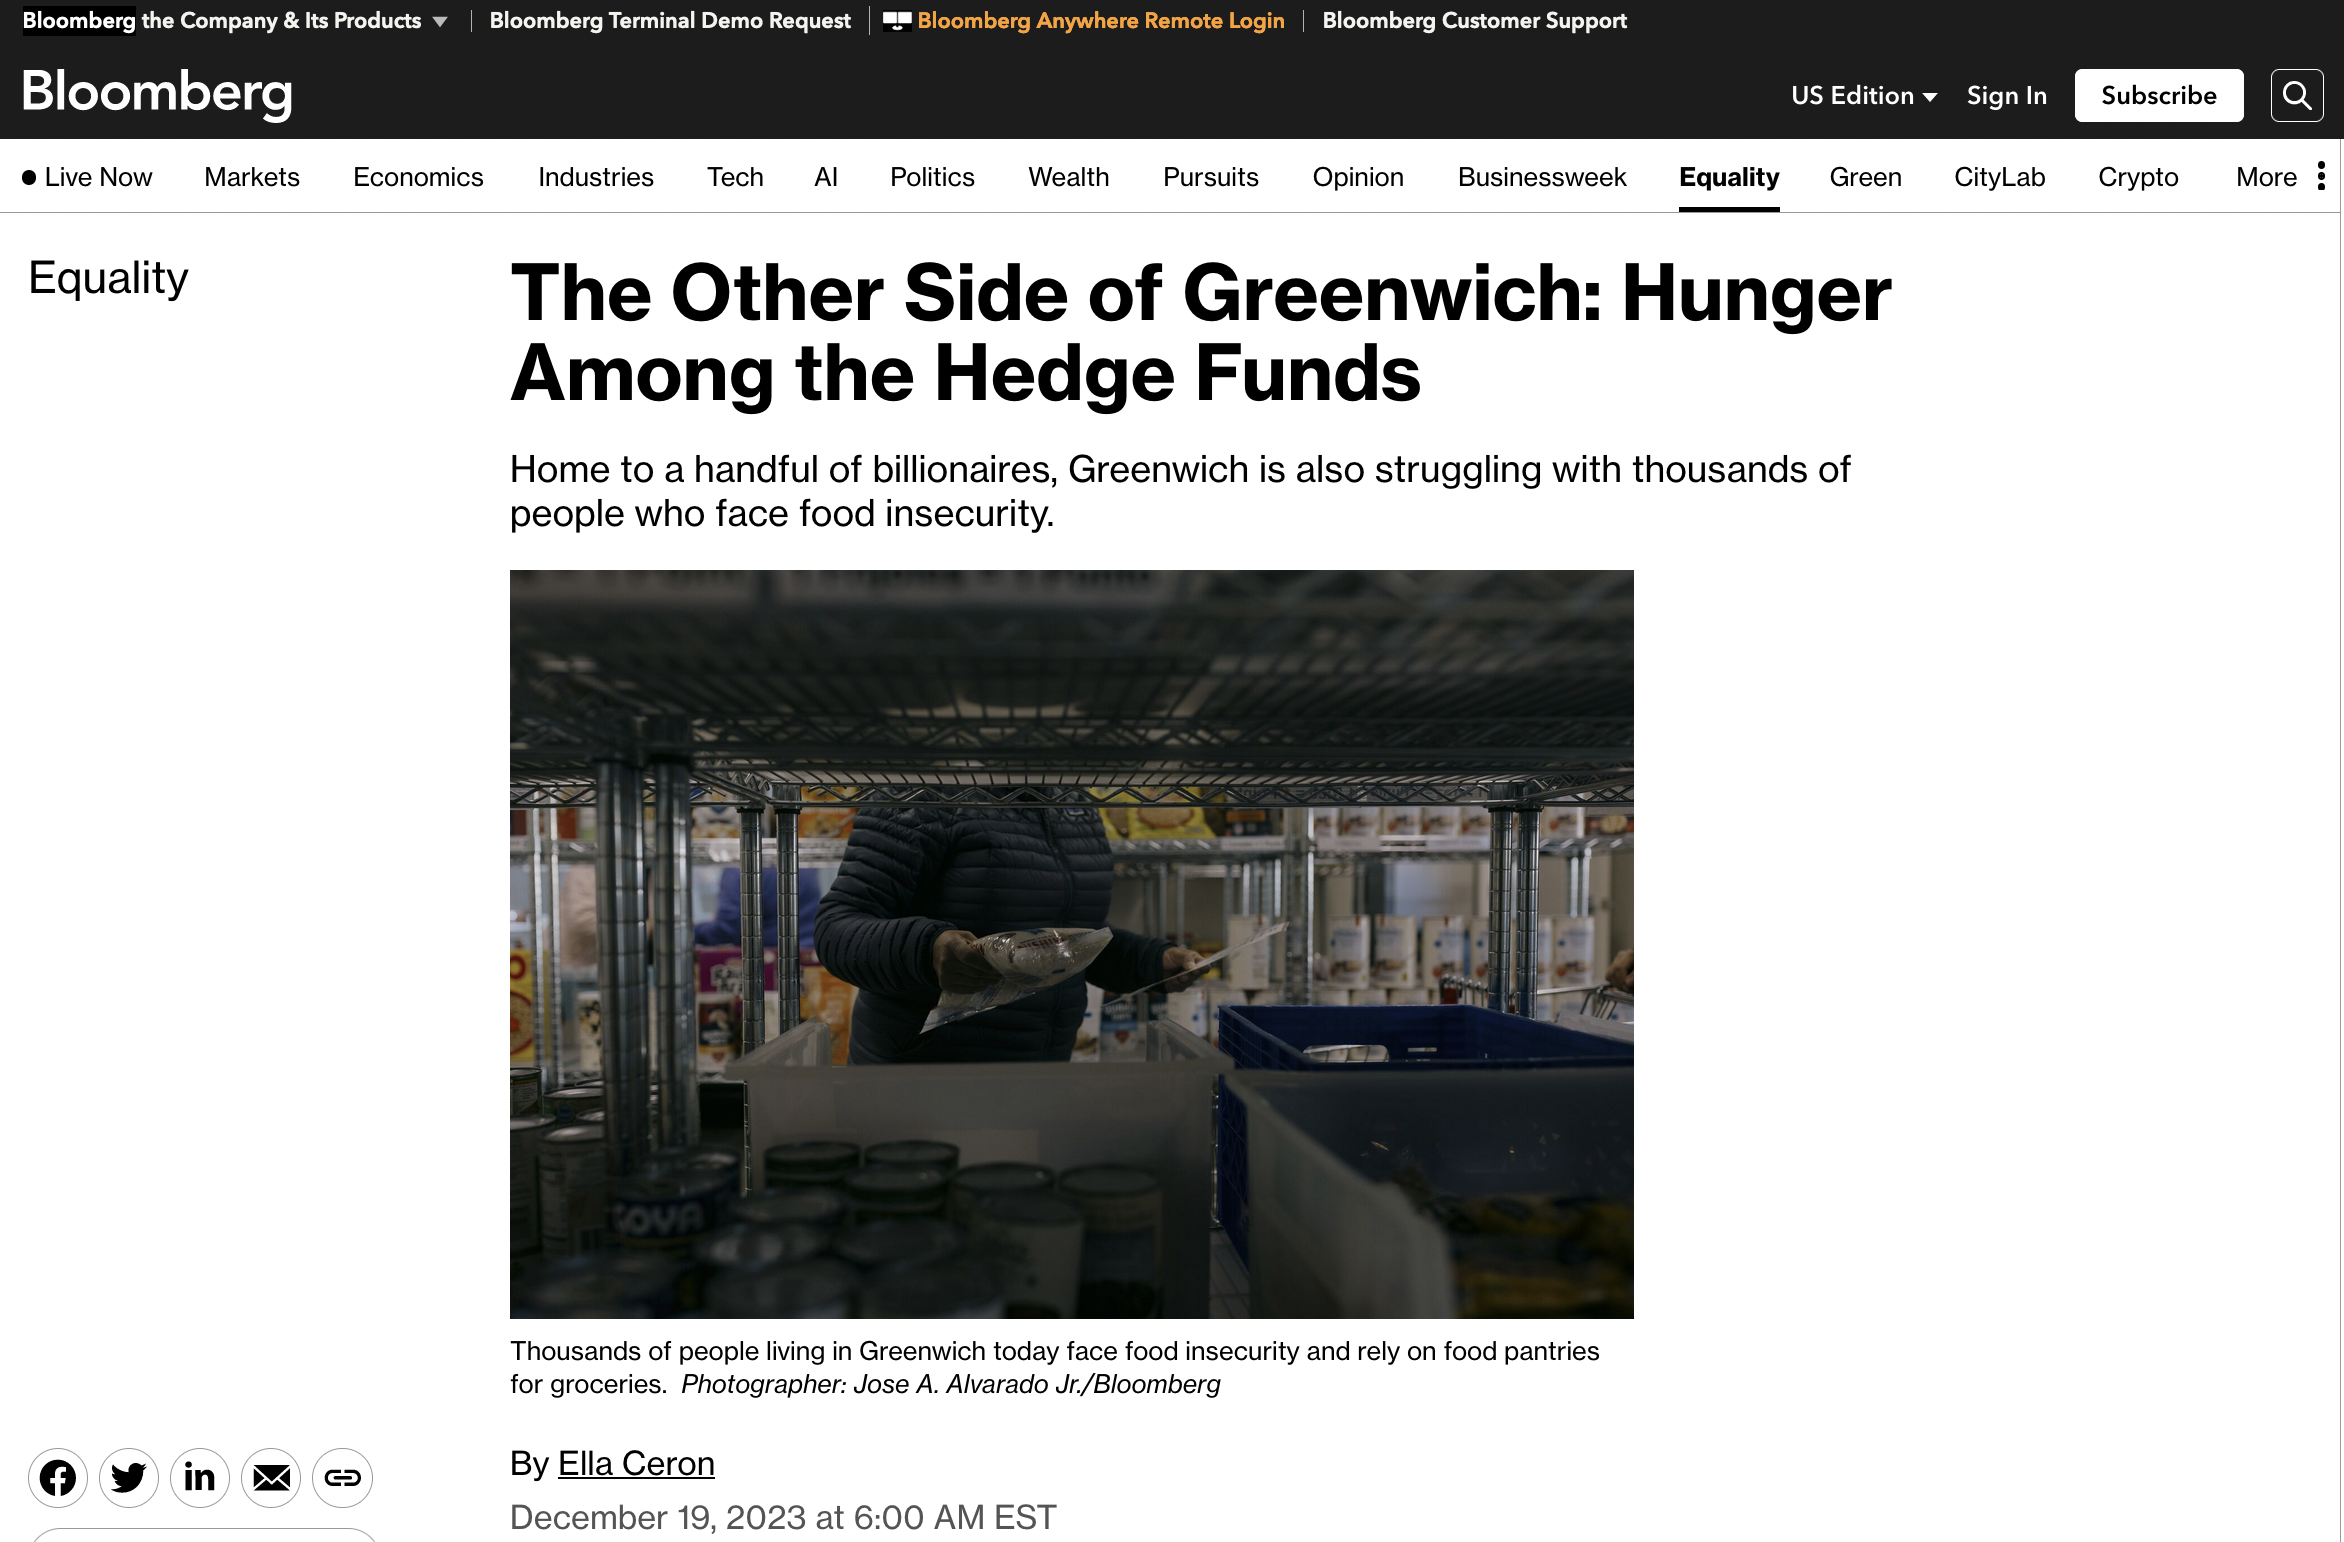 for Bloomberg: The Other Side of Greenwich: Hunger Among the Hedge Funds